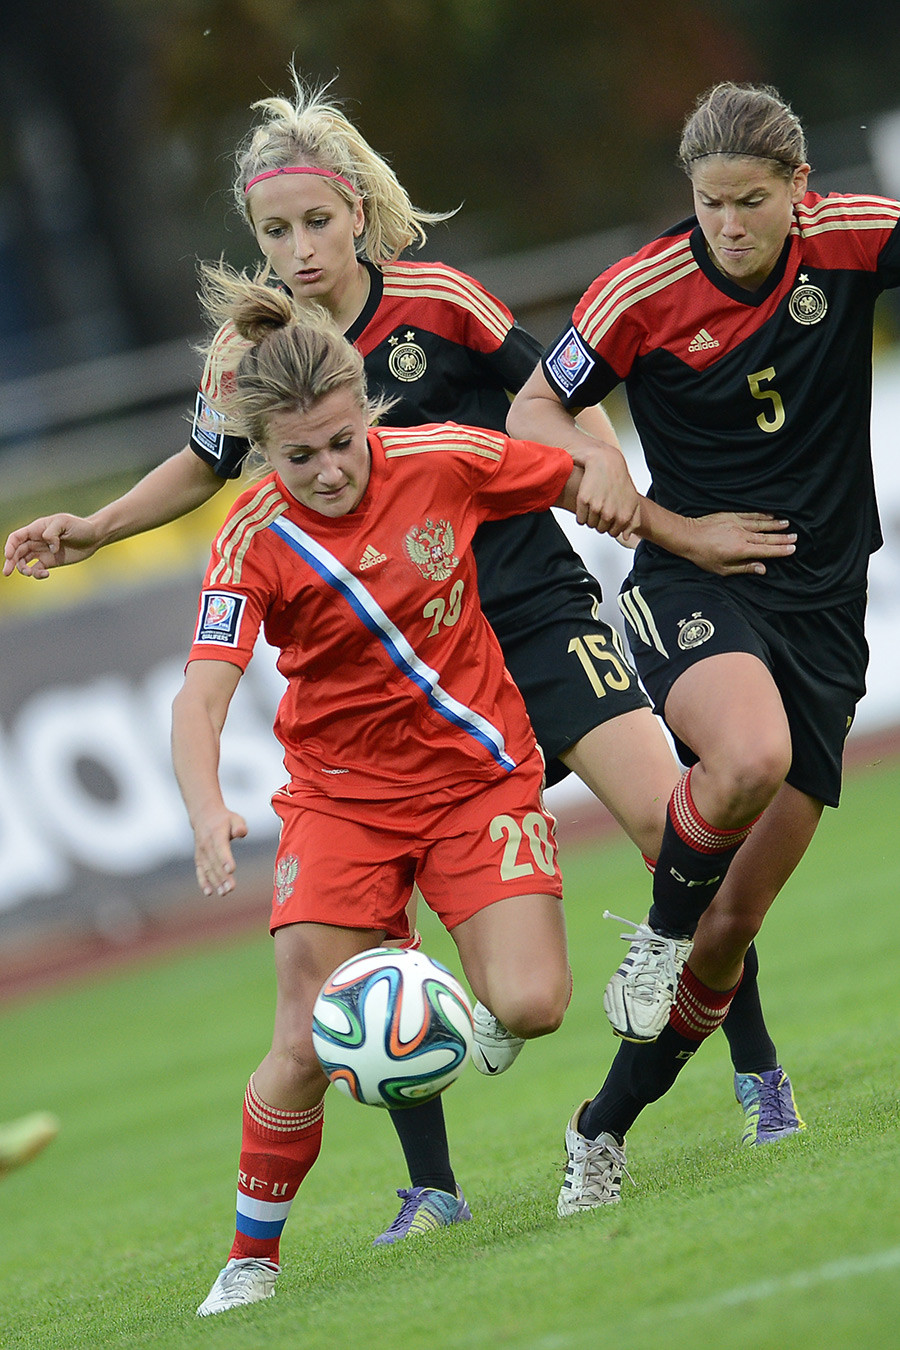 Nelli Korovkina (Russia), Kathrin Hendrich (Germany) and Annike Krahn (Germany), from left, during the Football World Cup 2015 qualification match between the national women's teams of Russia and Germany.